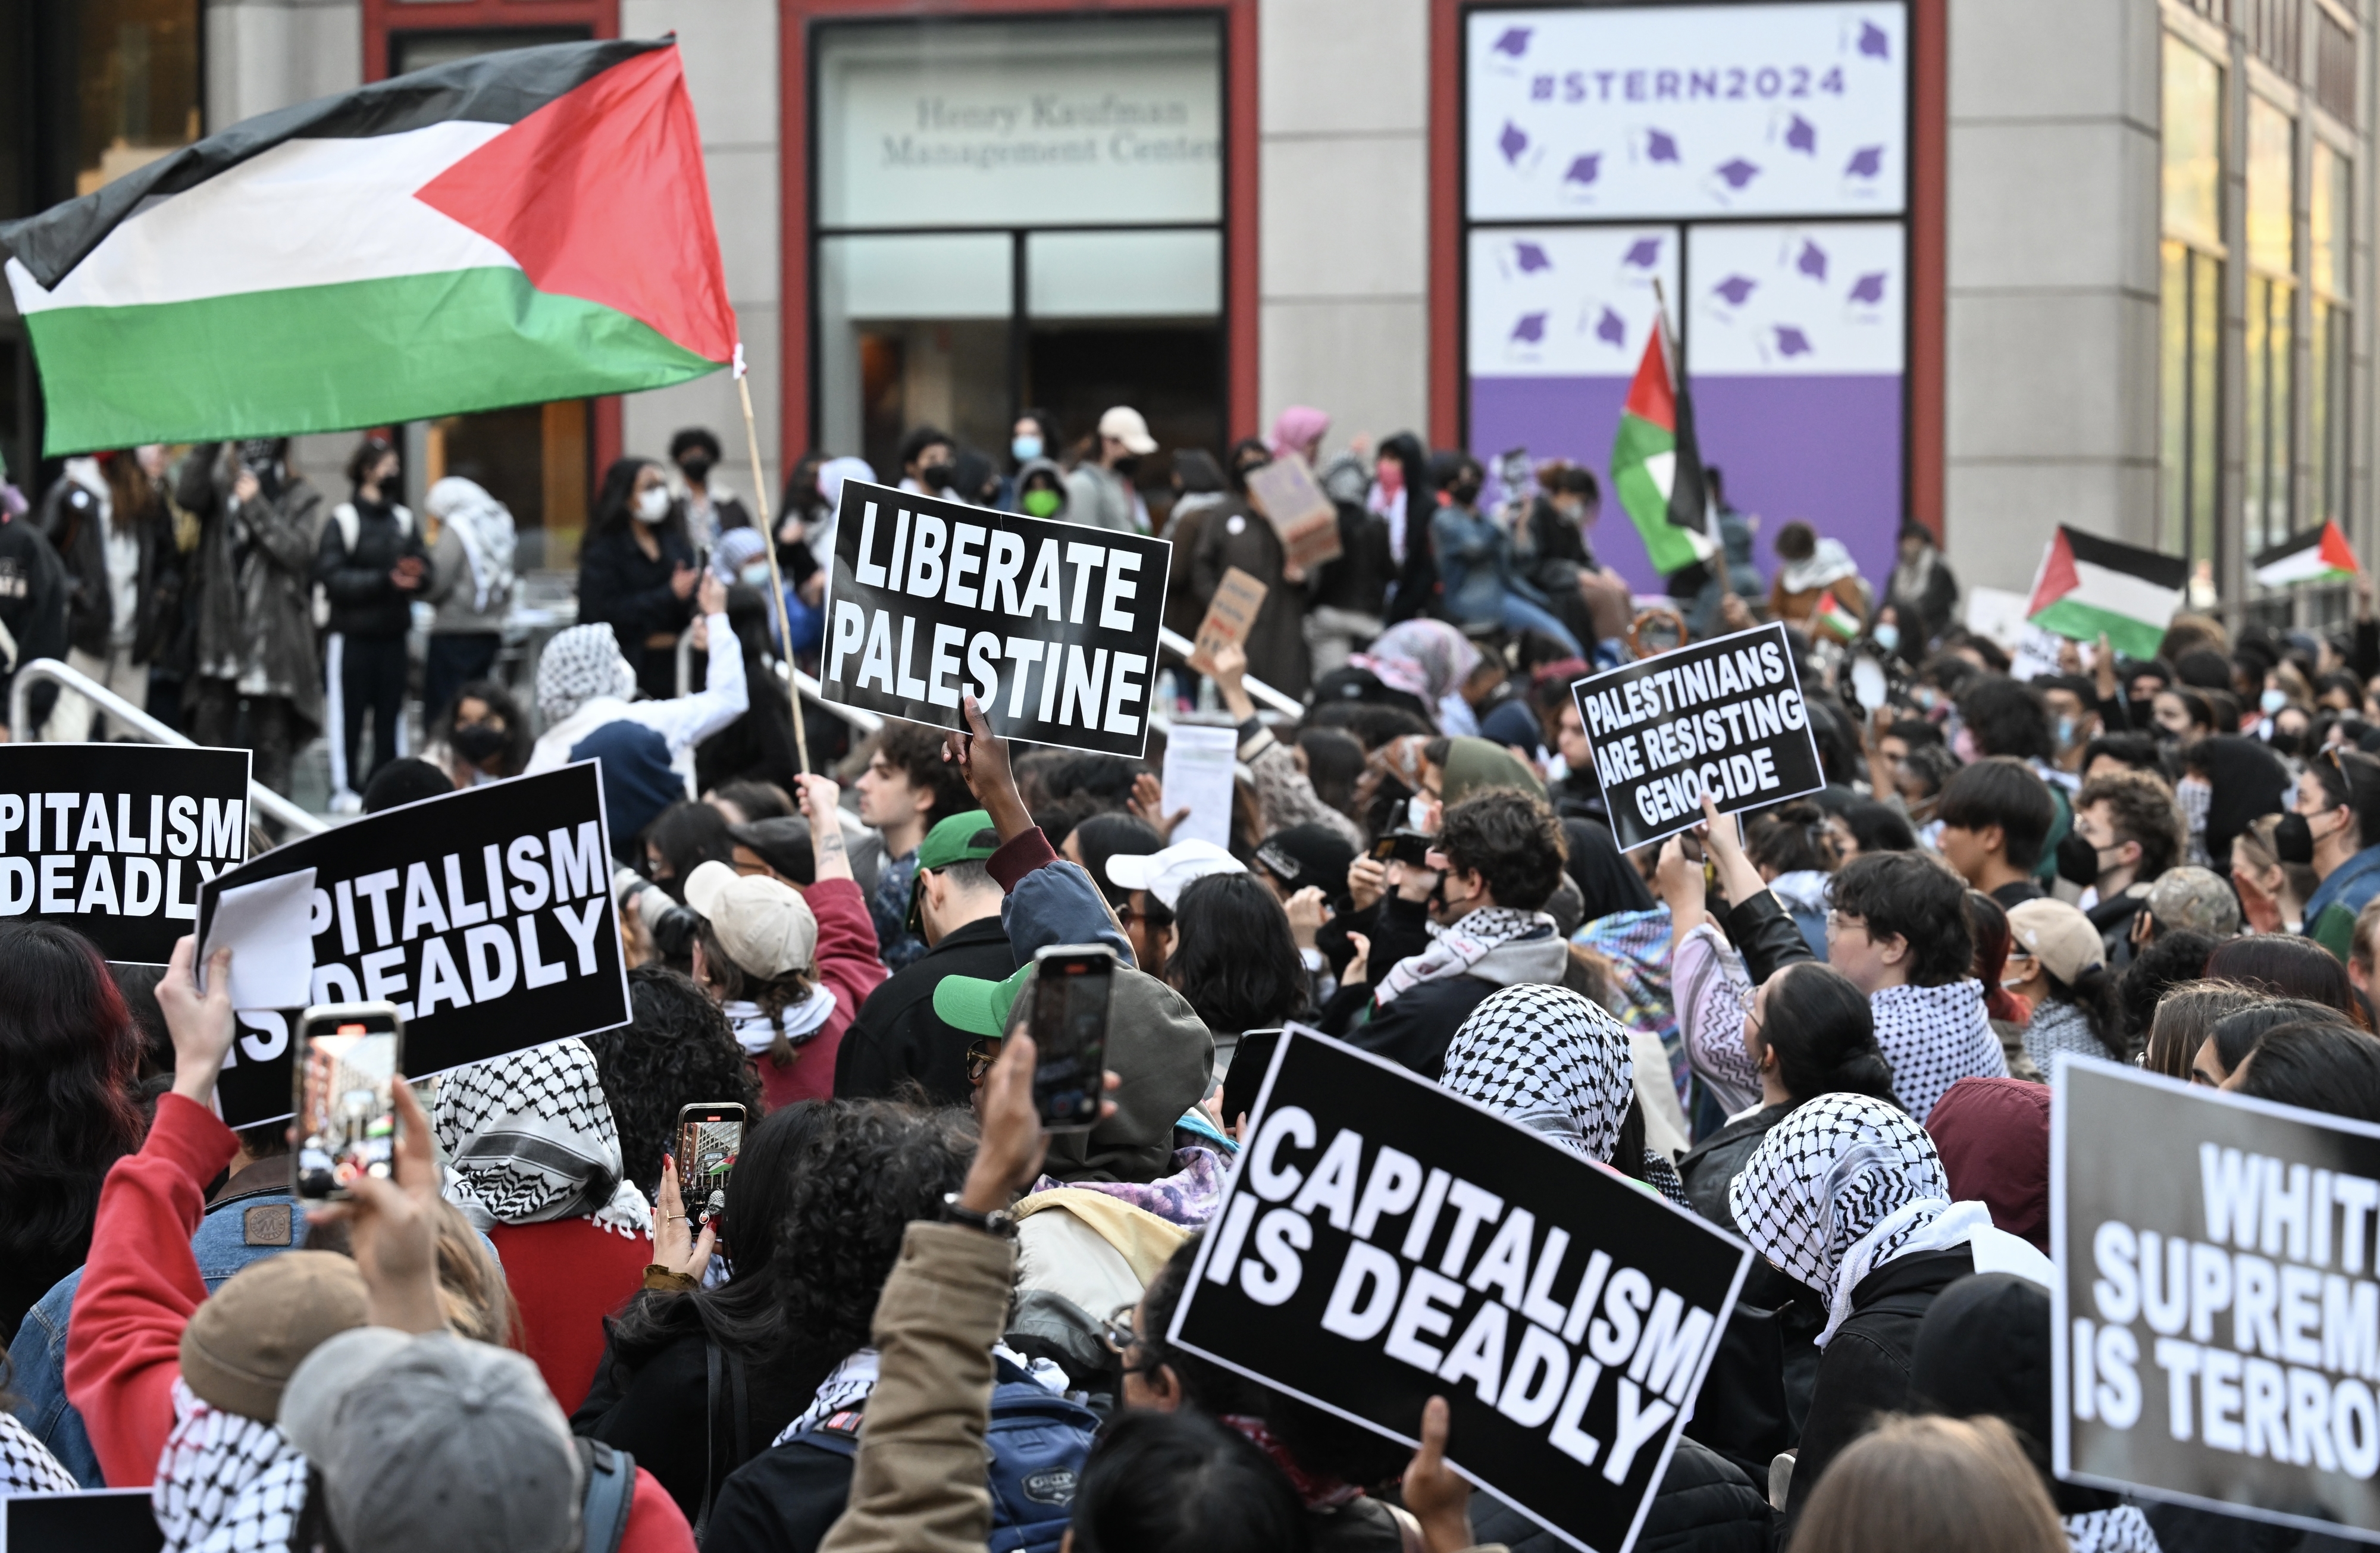 Crowd protesting with signs supporting Palestine and opposing capitalism